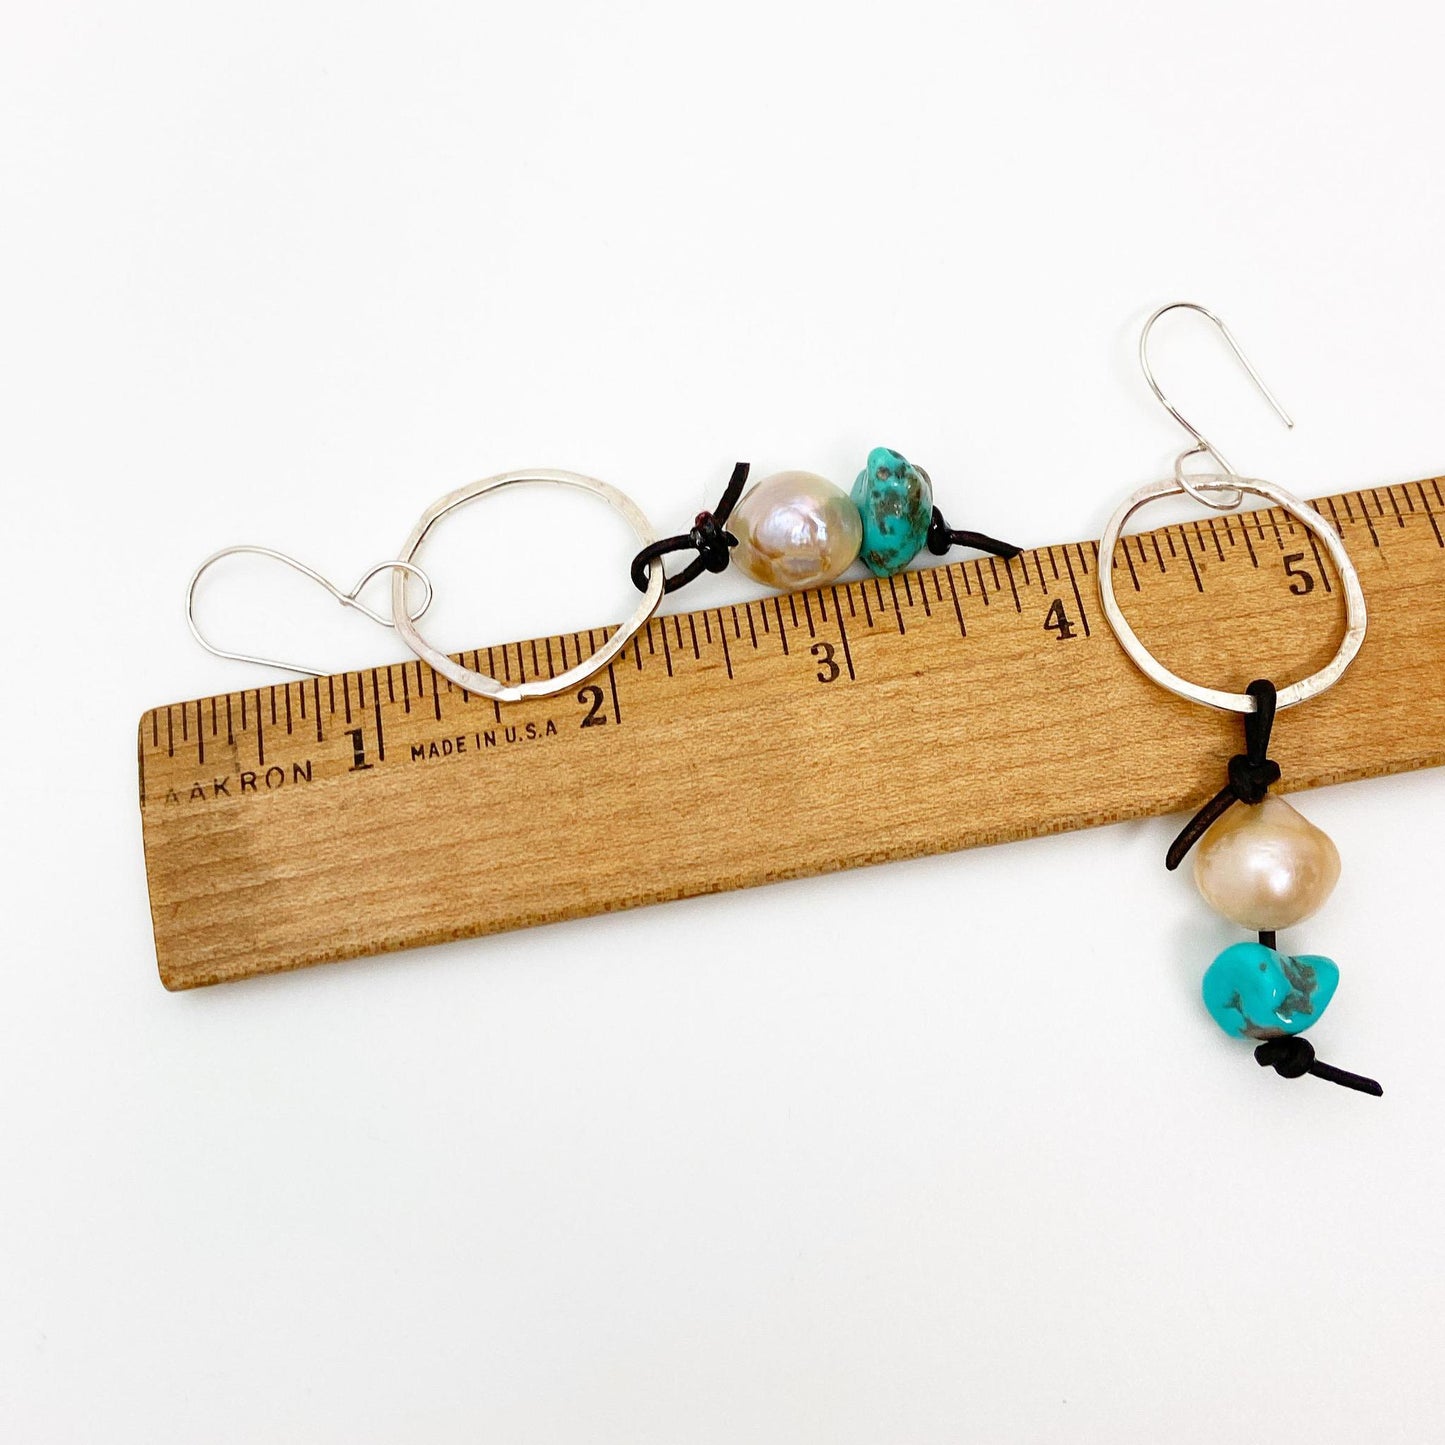 Earrings - Hoops with Corded Pearl and Turquoise - Sterling Originals